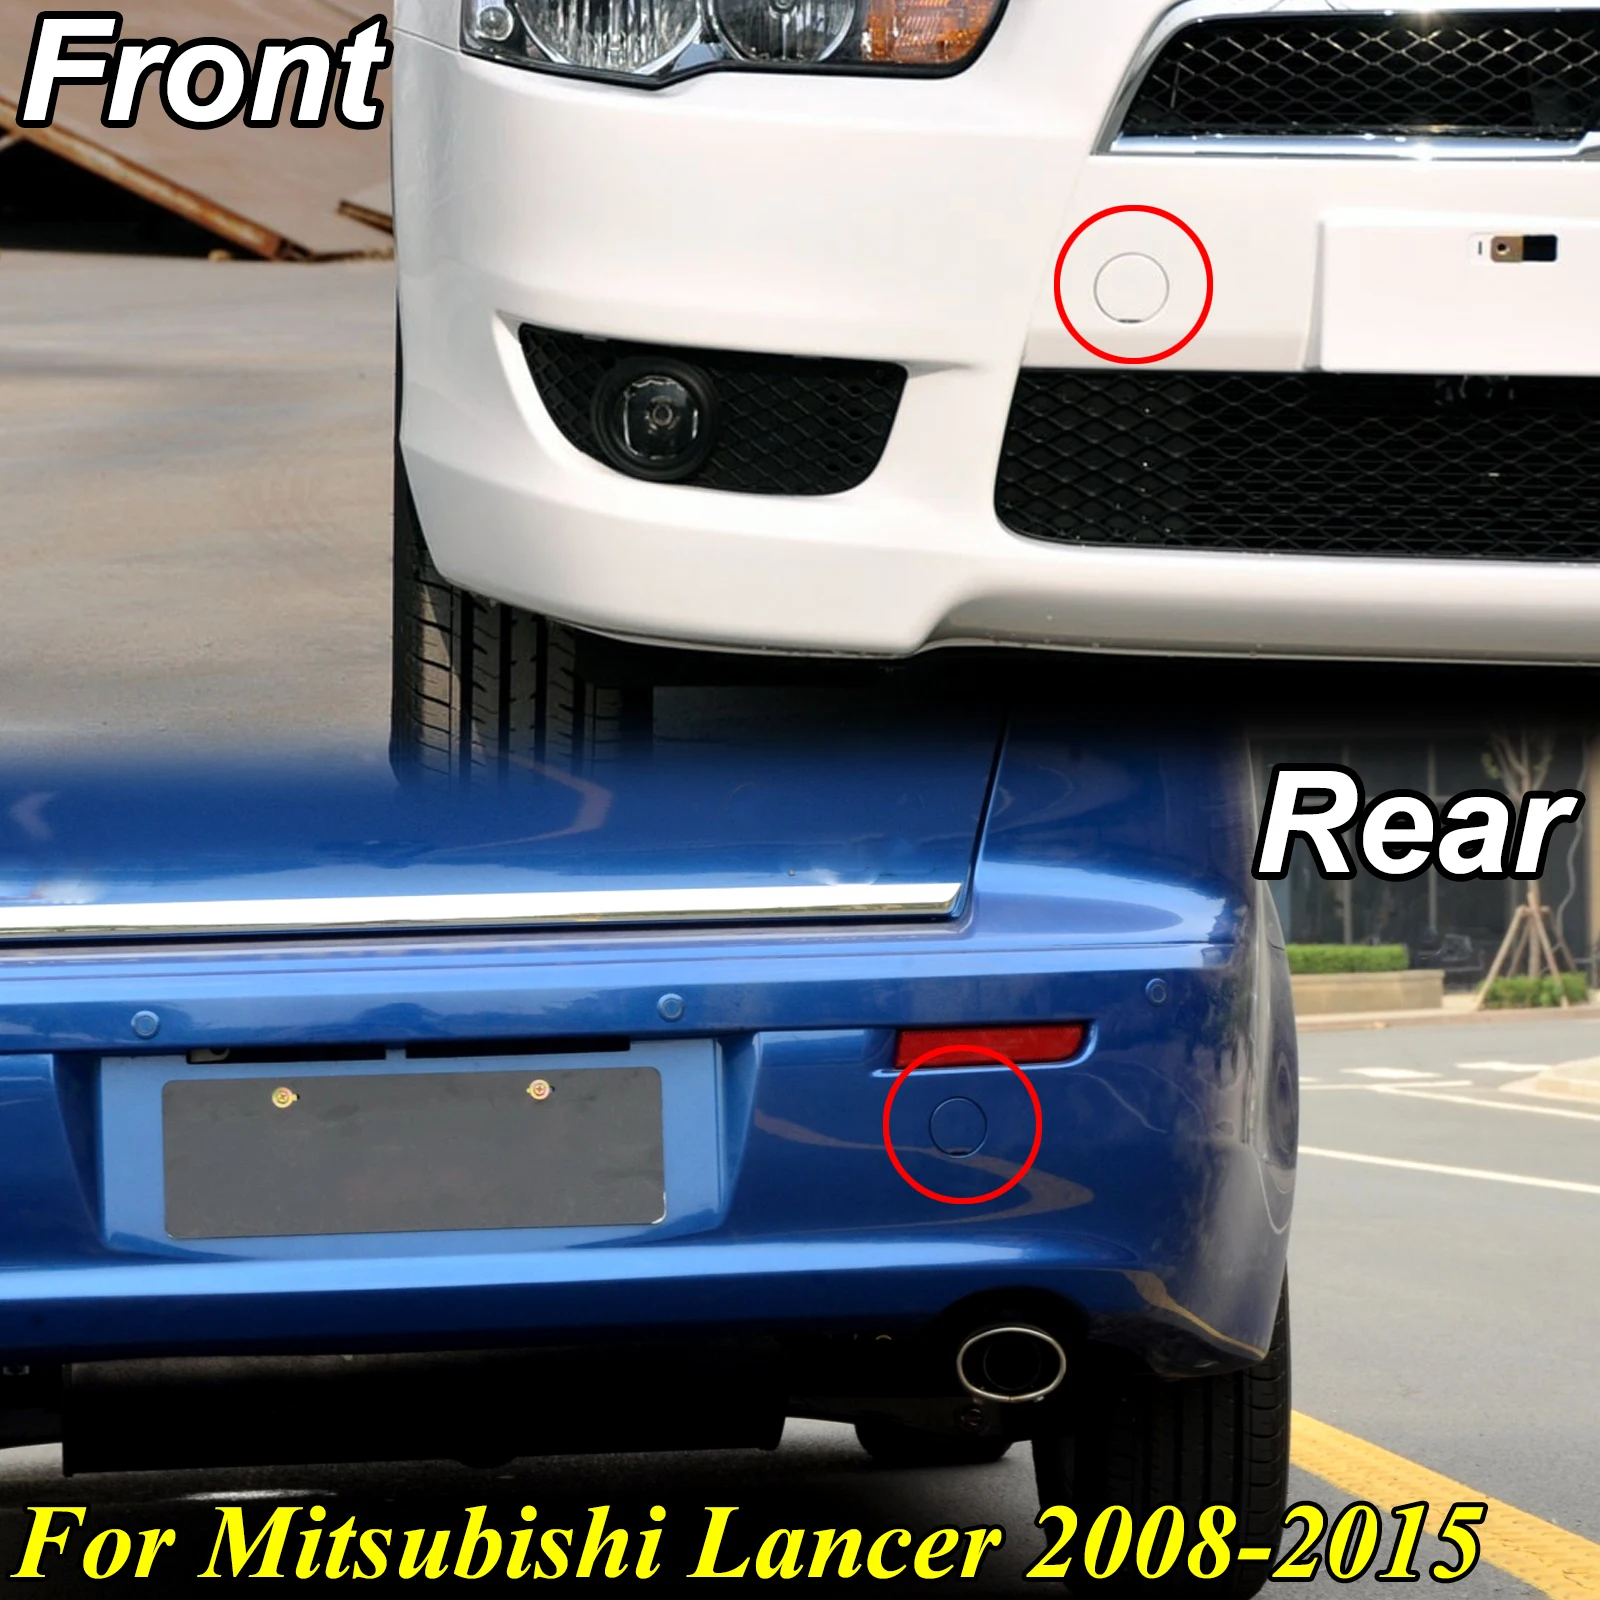 

Front Rear Bumper Tow Hook Unprimed Cover Towing Eye Cap For Mitsubishi Lancer 2008-2015 Car Accessories 2009 2010 2012 2013